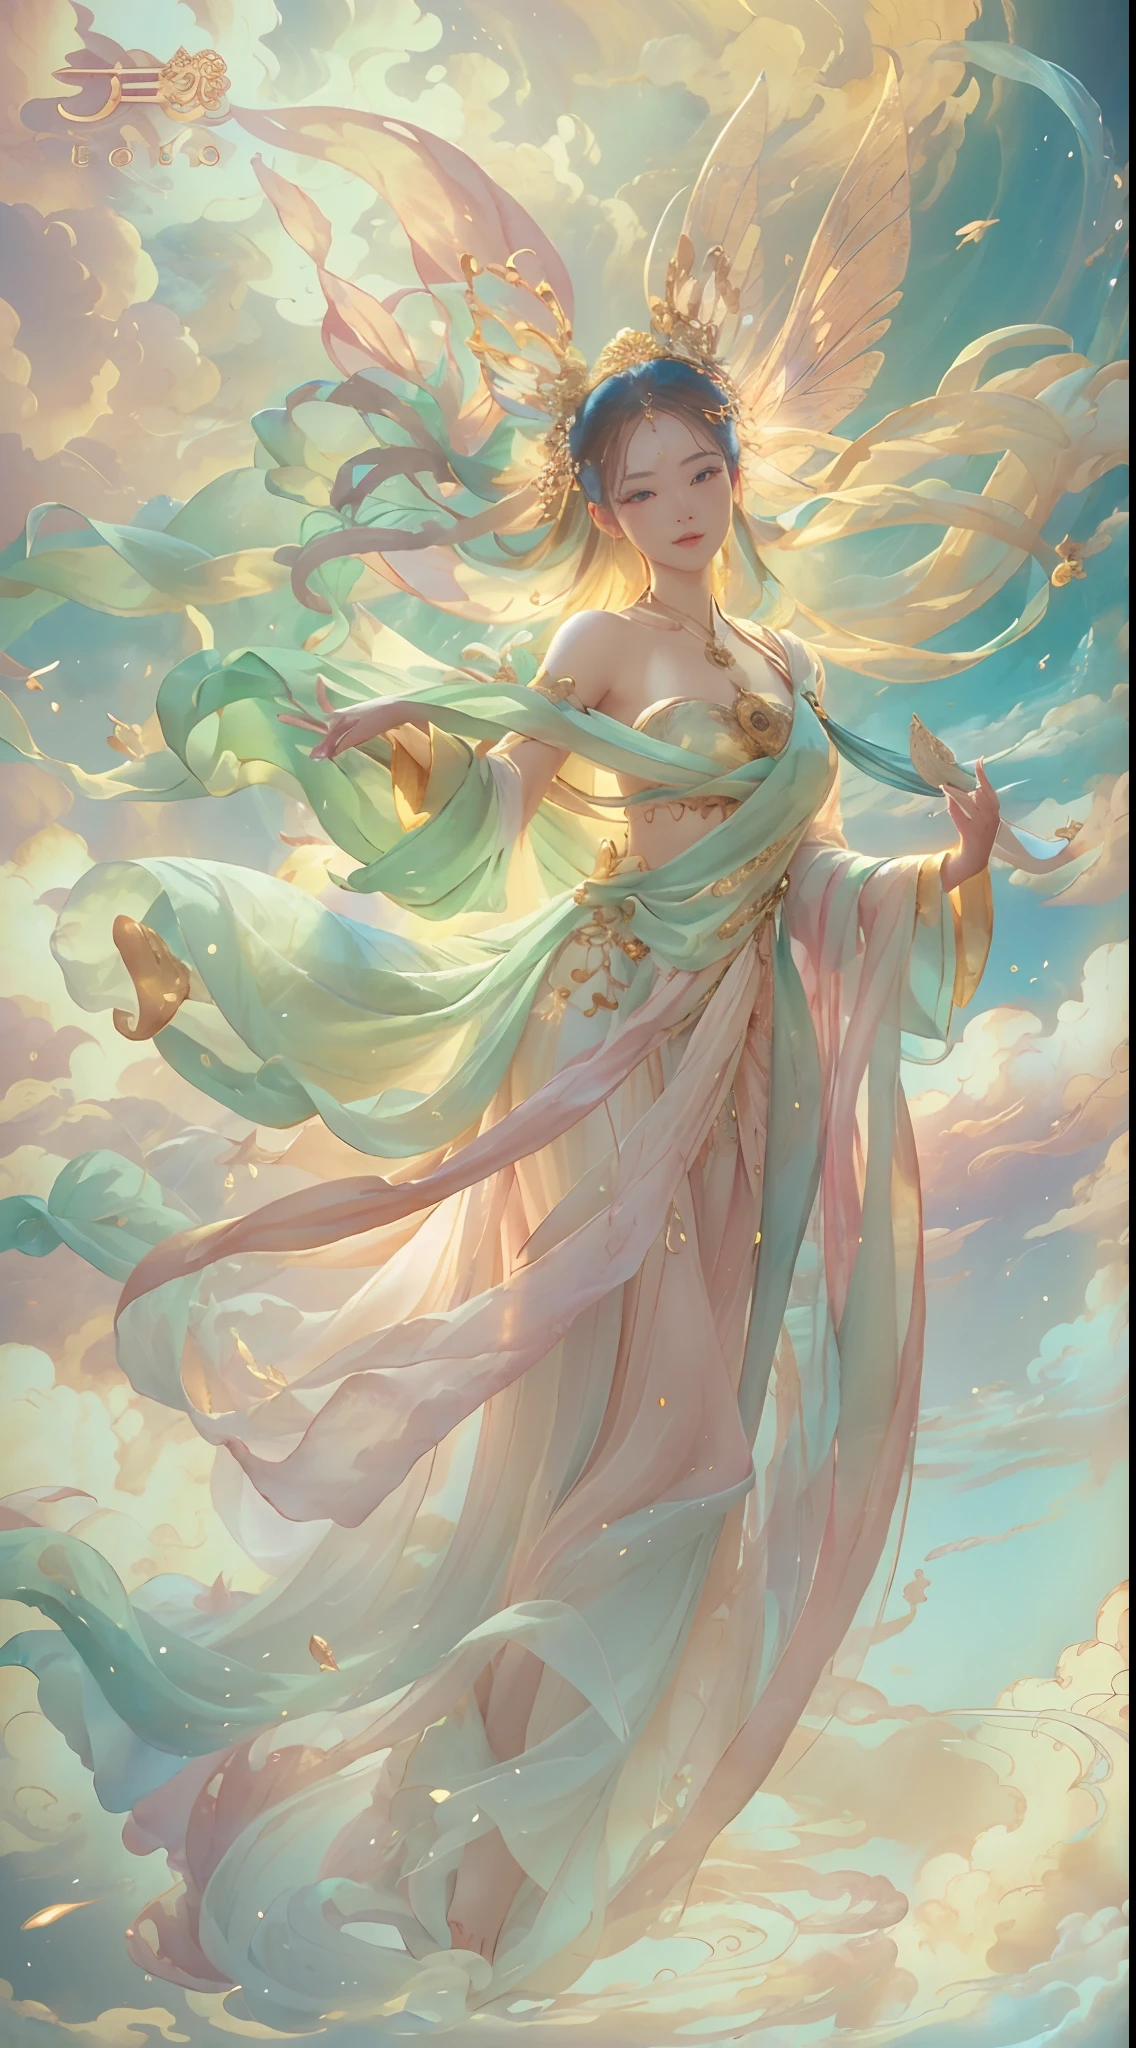 （Beauty fairy）, （Celestial），（dunhuang）, （faeries）, She floats in the sky, Colorful silk cloth flutters，Clouds surround，（Peerless looks）, （White silk robe）,Normal human fingers， Foot on auspicious clouds，Light smile, neo-classical, Chiaroscuro, Cinematic lighting, god light, Ray tracing, character sheets, projected inset, first person perspective, hyper HD, Masterpiece, ccurate, Textured skin, Super detail, High details, High quality, Award-Awarded, Best quality, A high resolution, 8K，Ultra-high sharpness，Clear face，fully body photo，